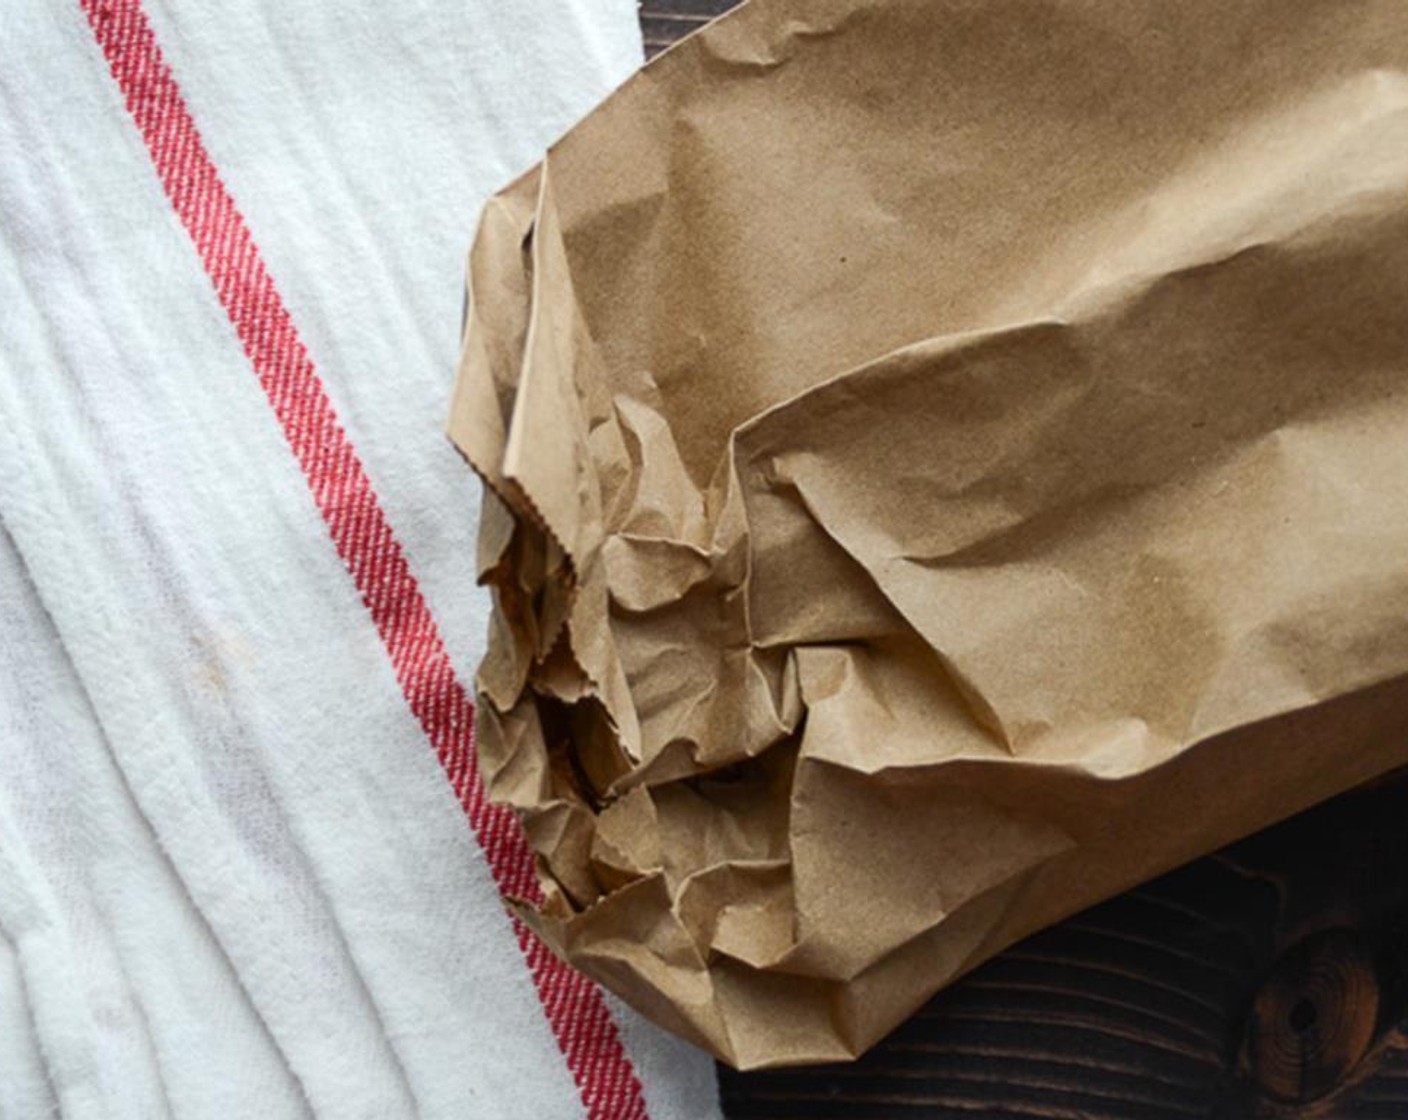 step 2 Remove from the oven and slip into a small paper bag. Roll up the end of the bag and let the pepper steam.